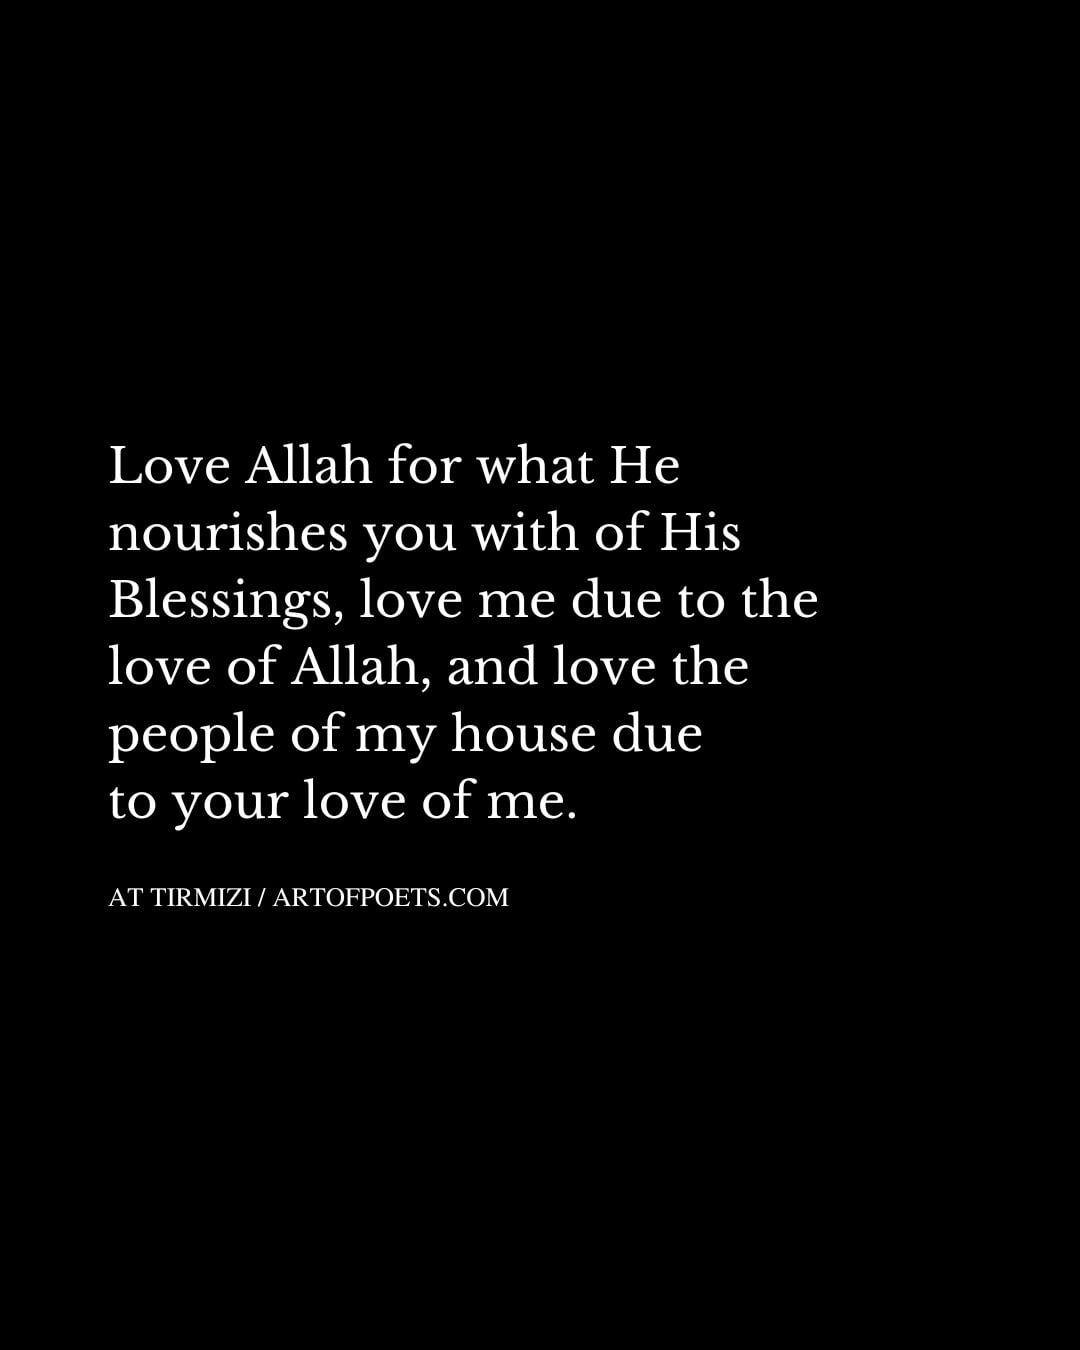 Love Allah for what He nourishes you with of His Blessings love me due to the love of Allah